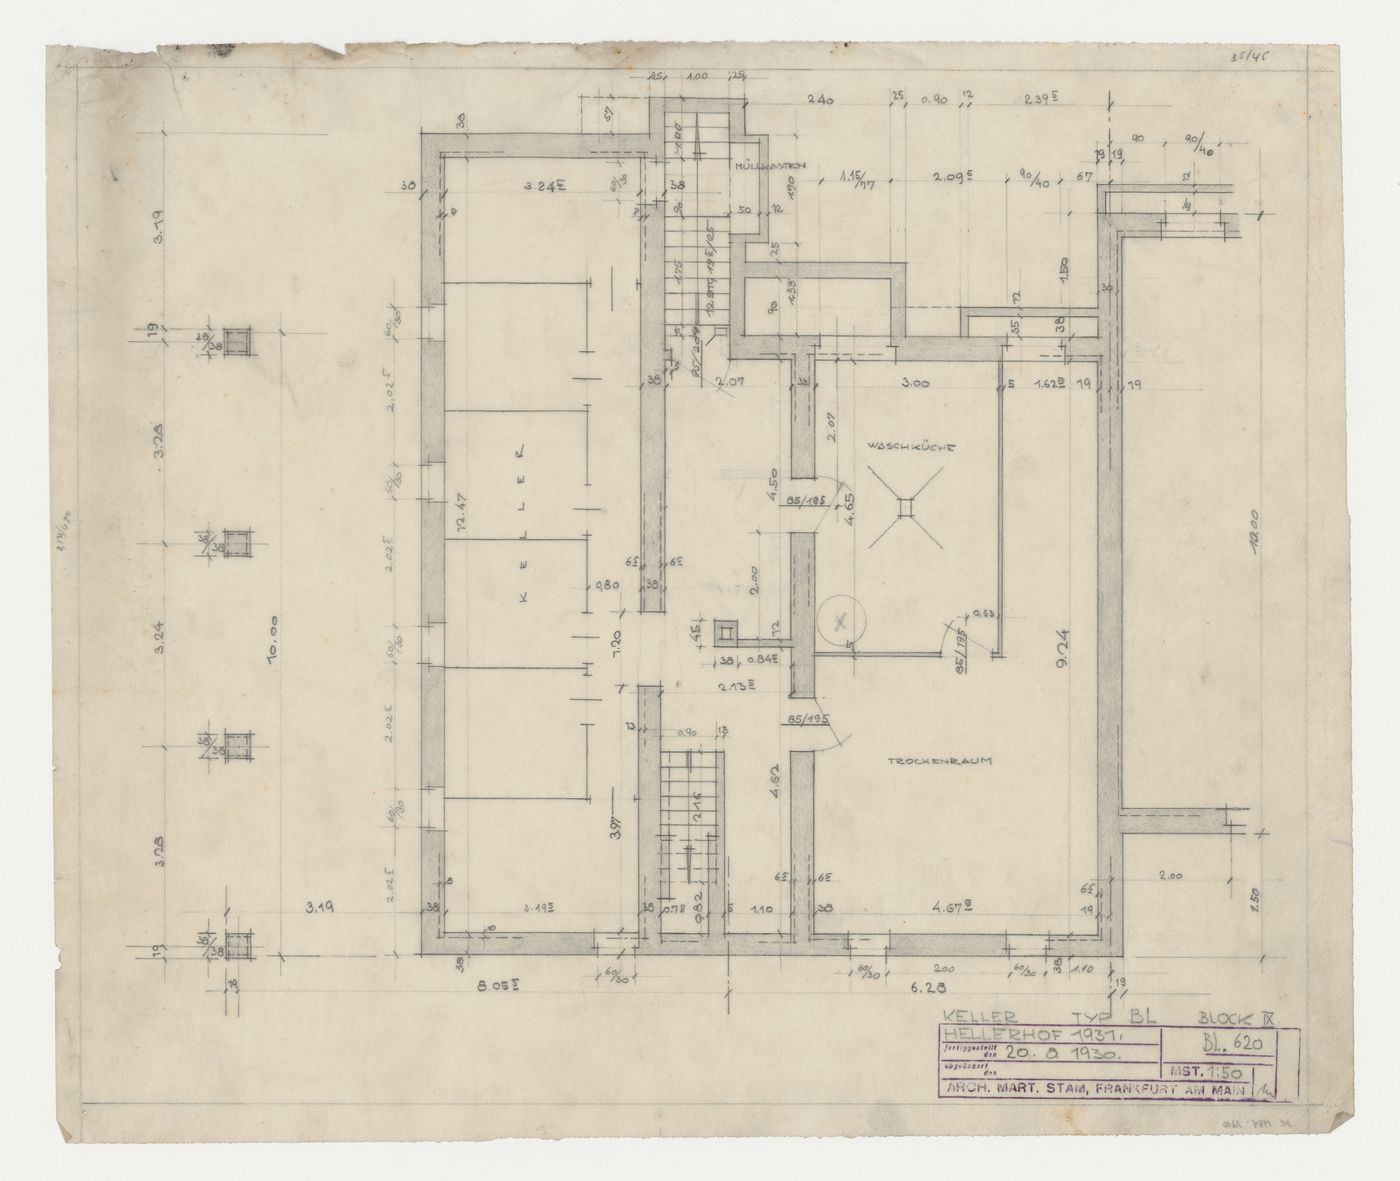 Basement plan for a type BL store and housing unit, Hellerhof Housing Estate, Frankfurt am Main, Germany